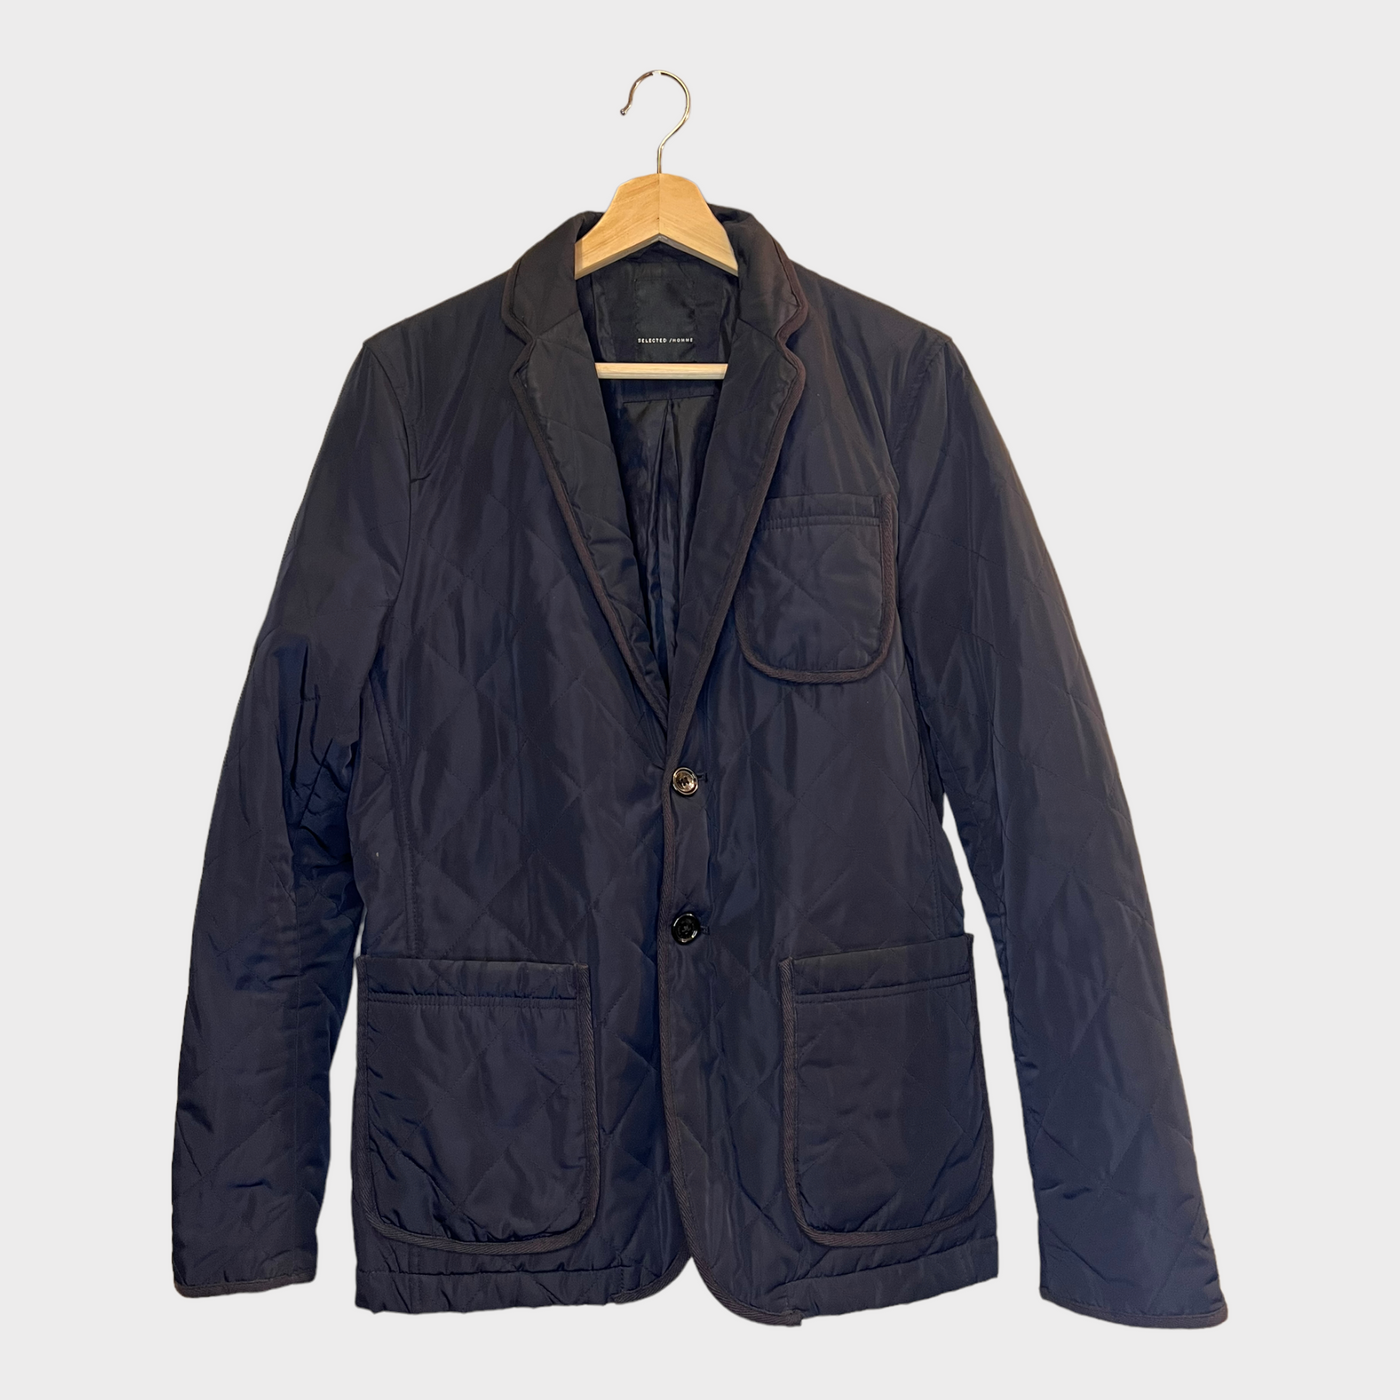 Padded Blazer Jacket from the brand Selected Homme front